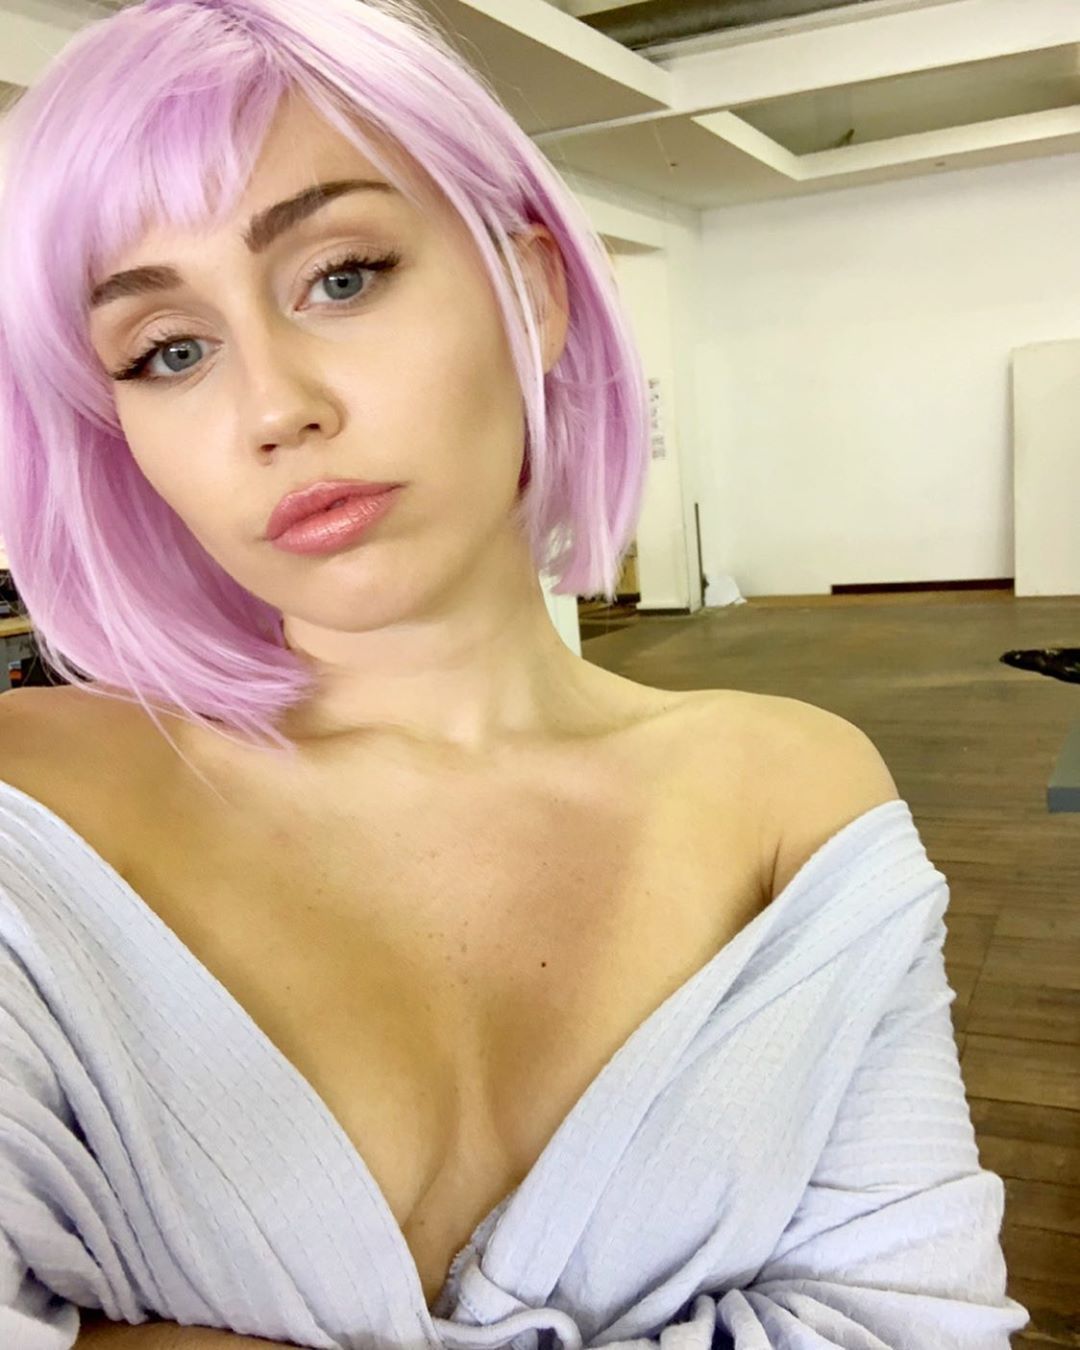 Miley Cyrus with pink hair